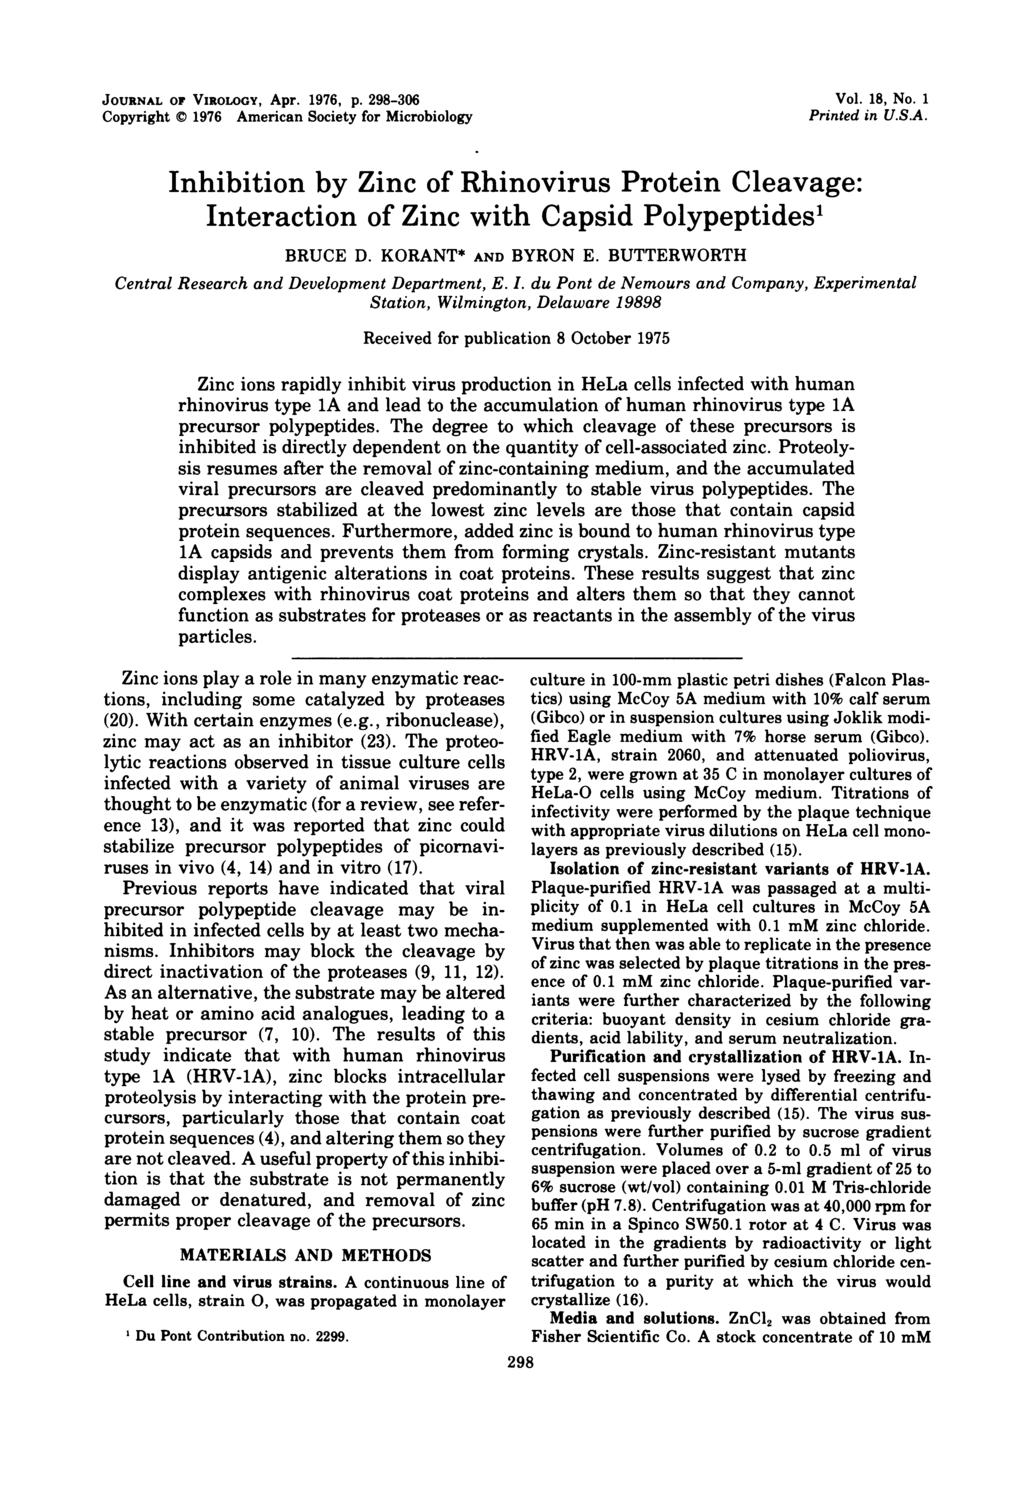 JOURNAL OF VIROLOGY, Apr. 1976, p. 298-306 Copyright 1976 American Society for Microbiology Vol. 18, No. 1 Printed in U.S.A. Inhibition by Zinc of Rhinovirus Protein Cleavage: Interaction of Zinc with Capsid Polypeptides' BRUCE D.